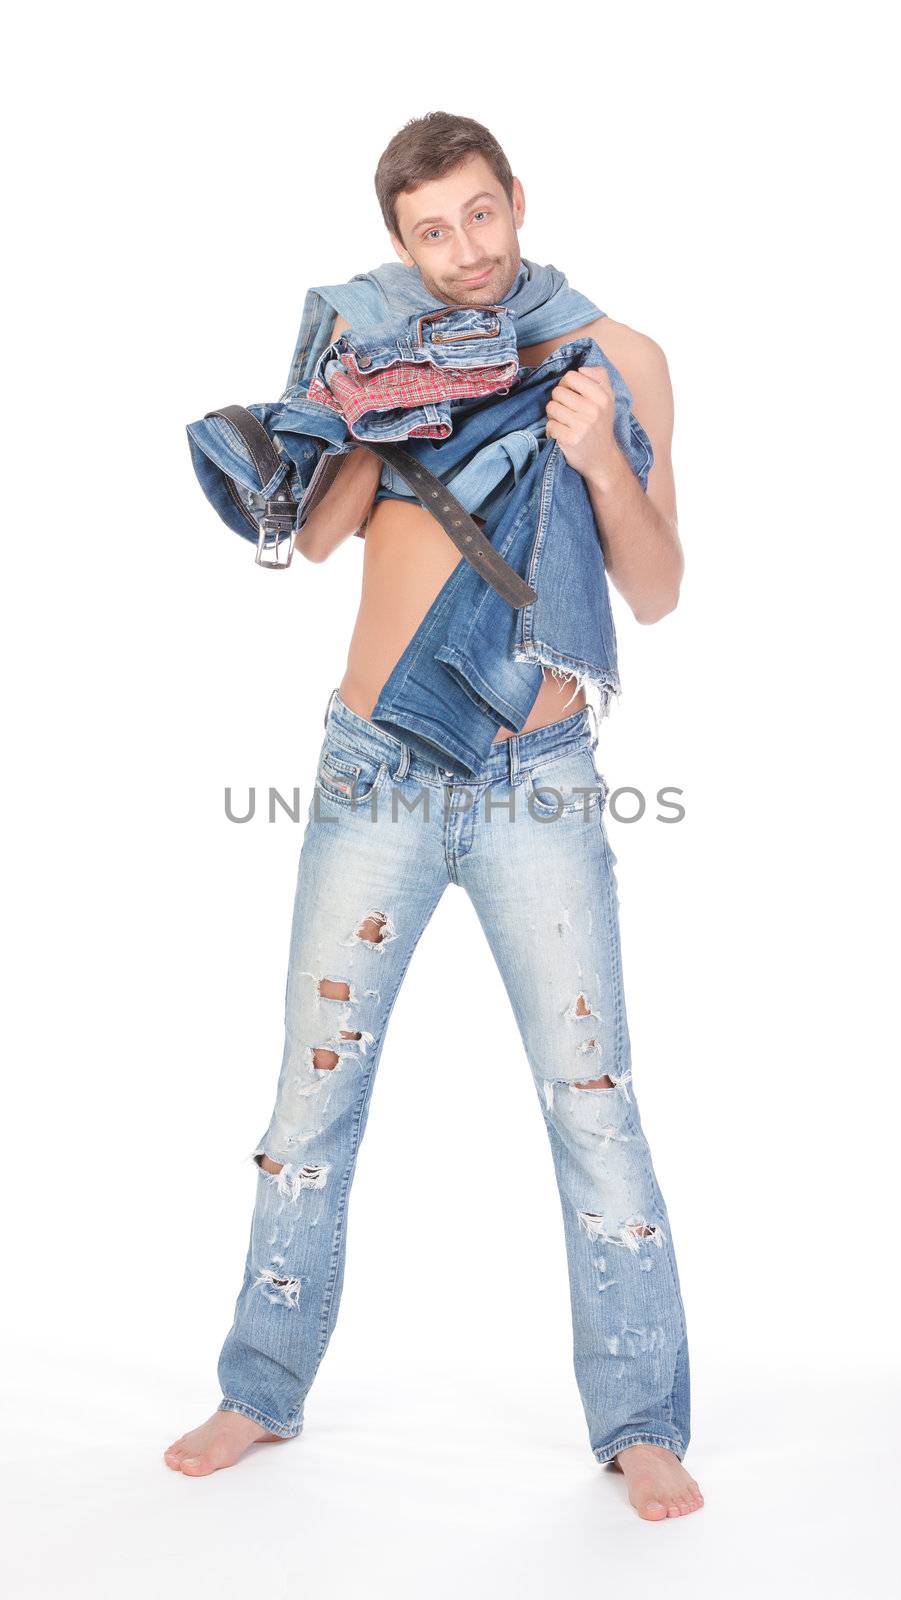 Cool shirtless trendy man in a pair of modern ragged jeans standing deciding what to wear with two pairs of denims in his hands